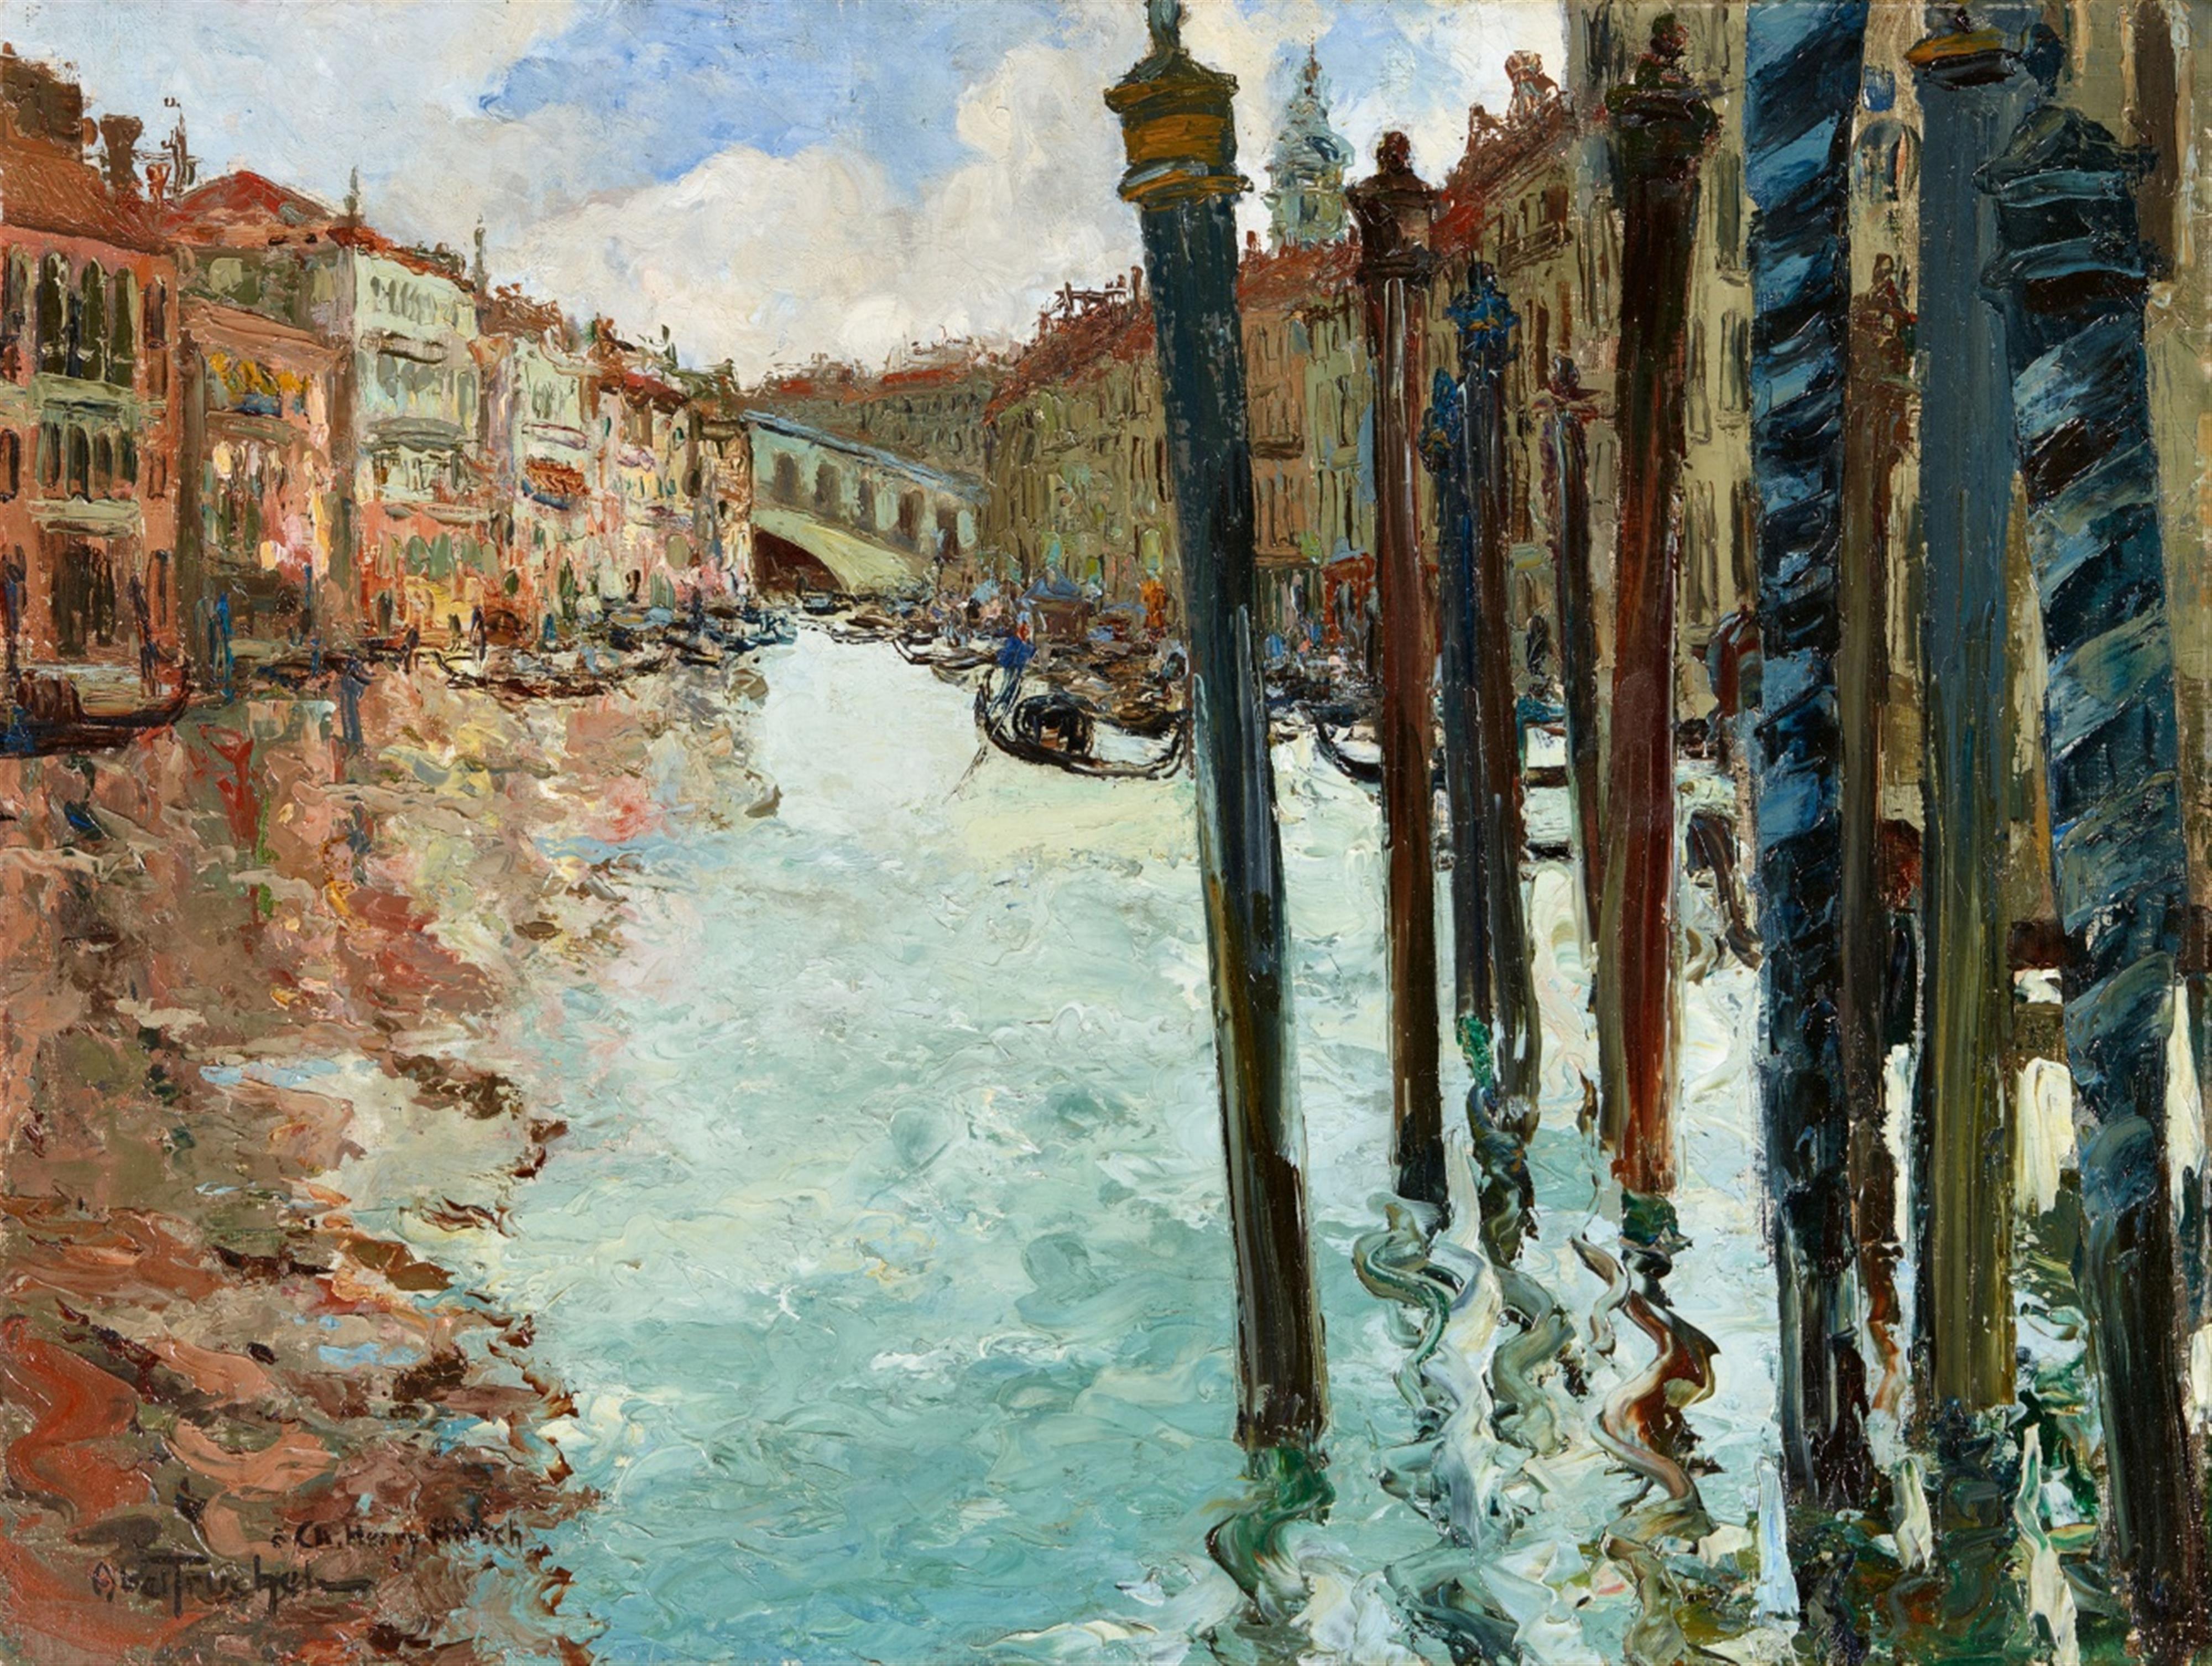 Abel-Truchet - View of the Grand Canal with the Rialto Bridge - image-1